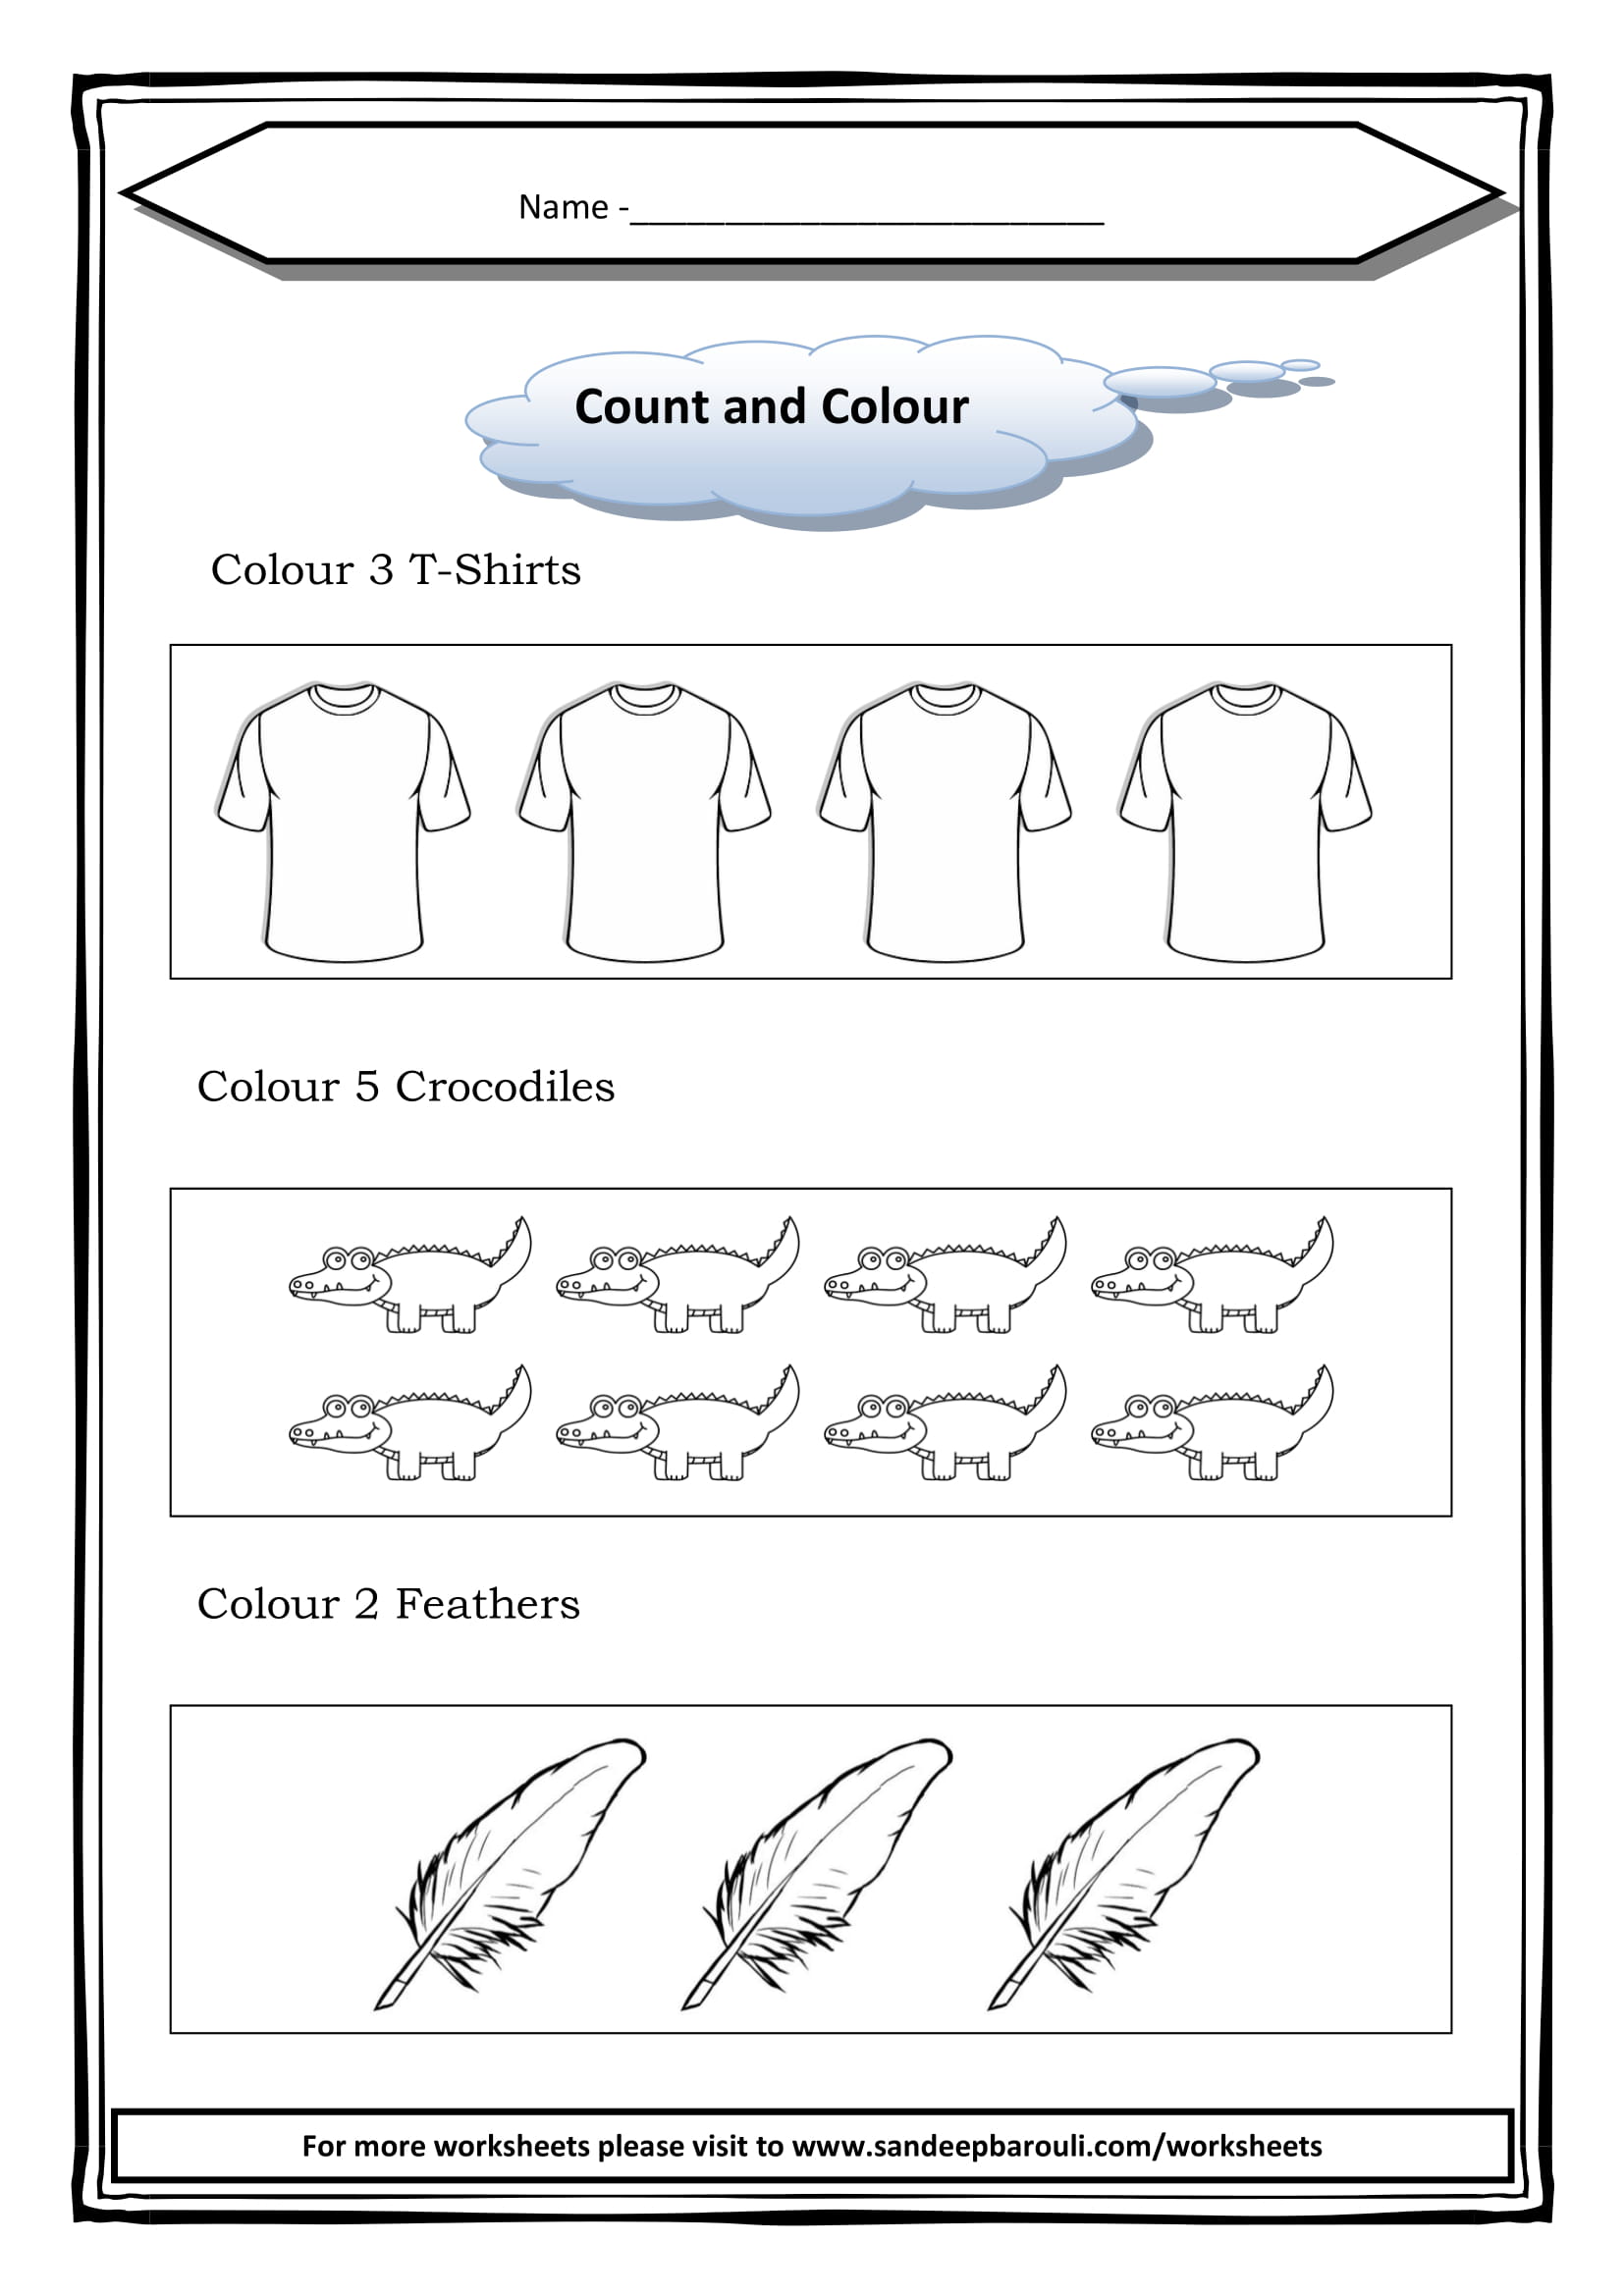 Count-and-Colour-Worksheet-for-class-1